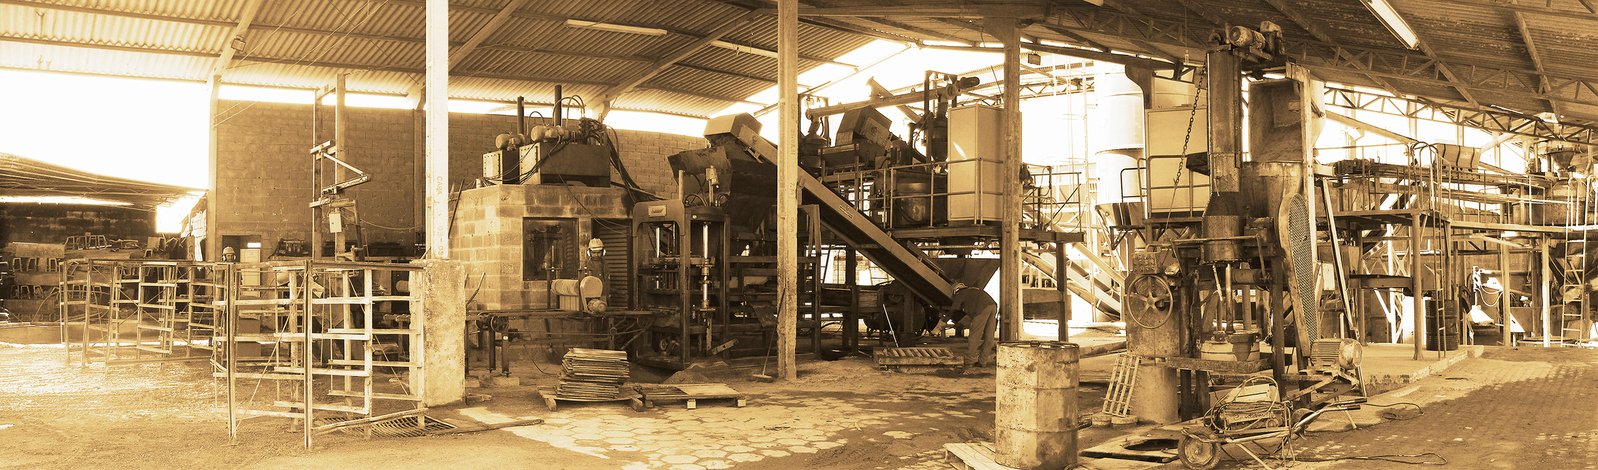 old timey picture of machinery inside building